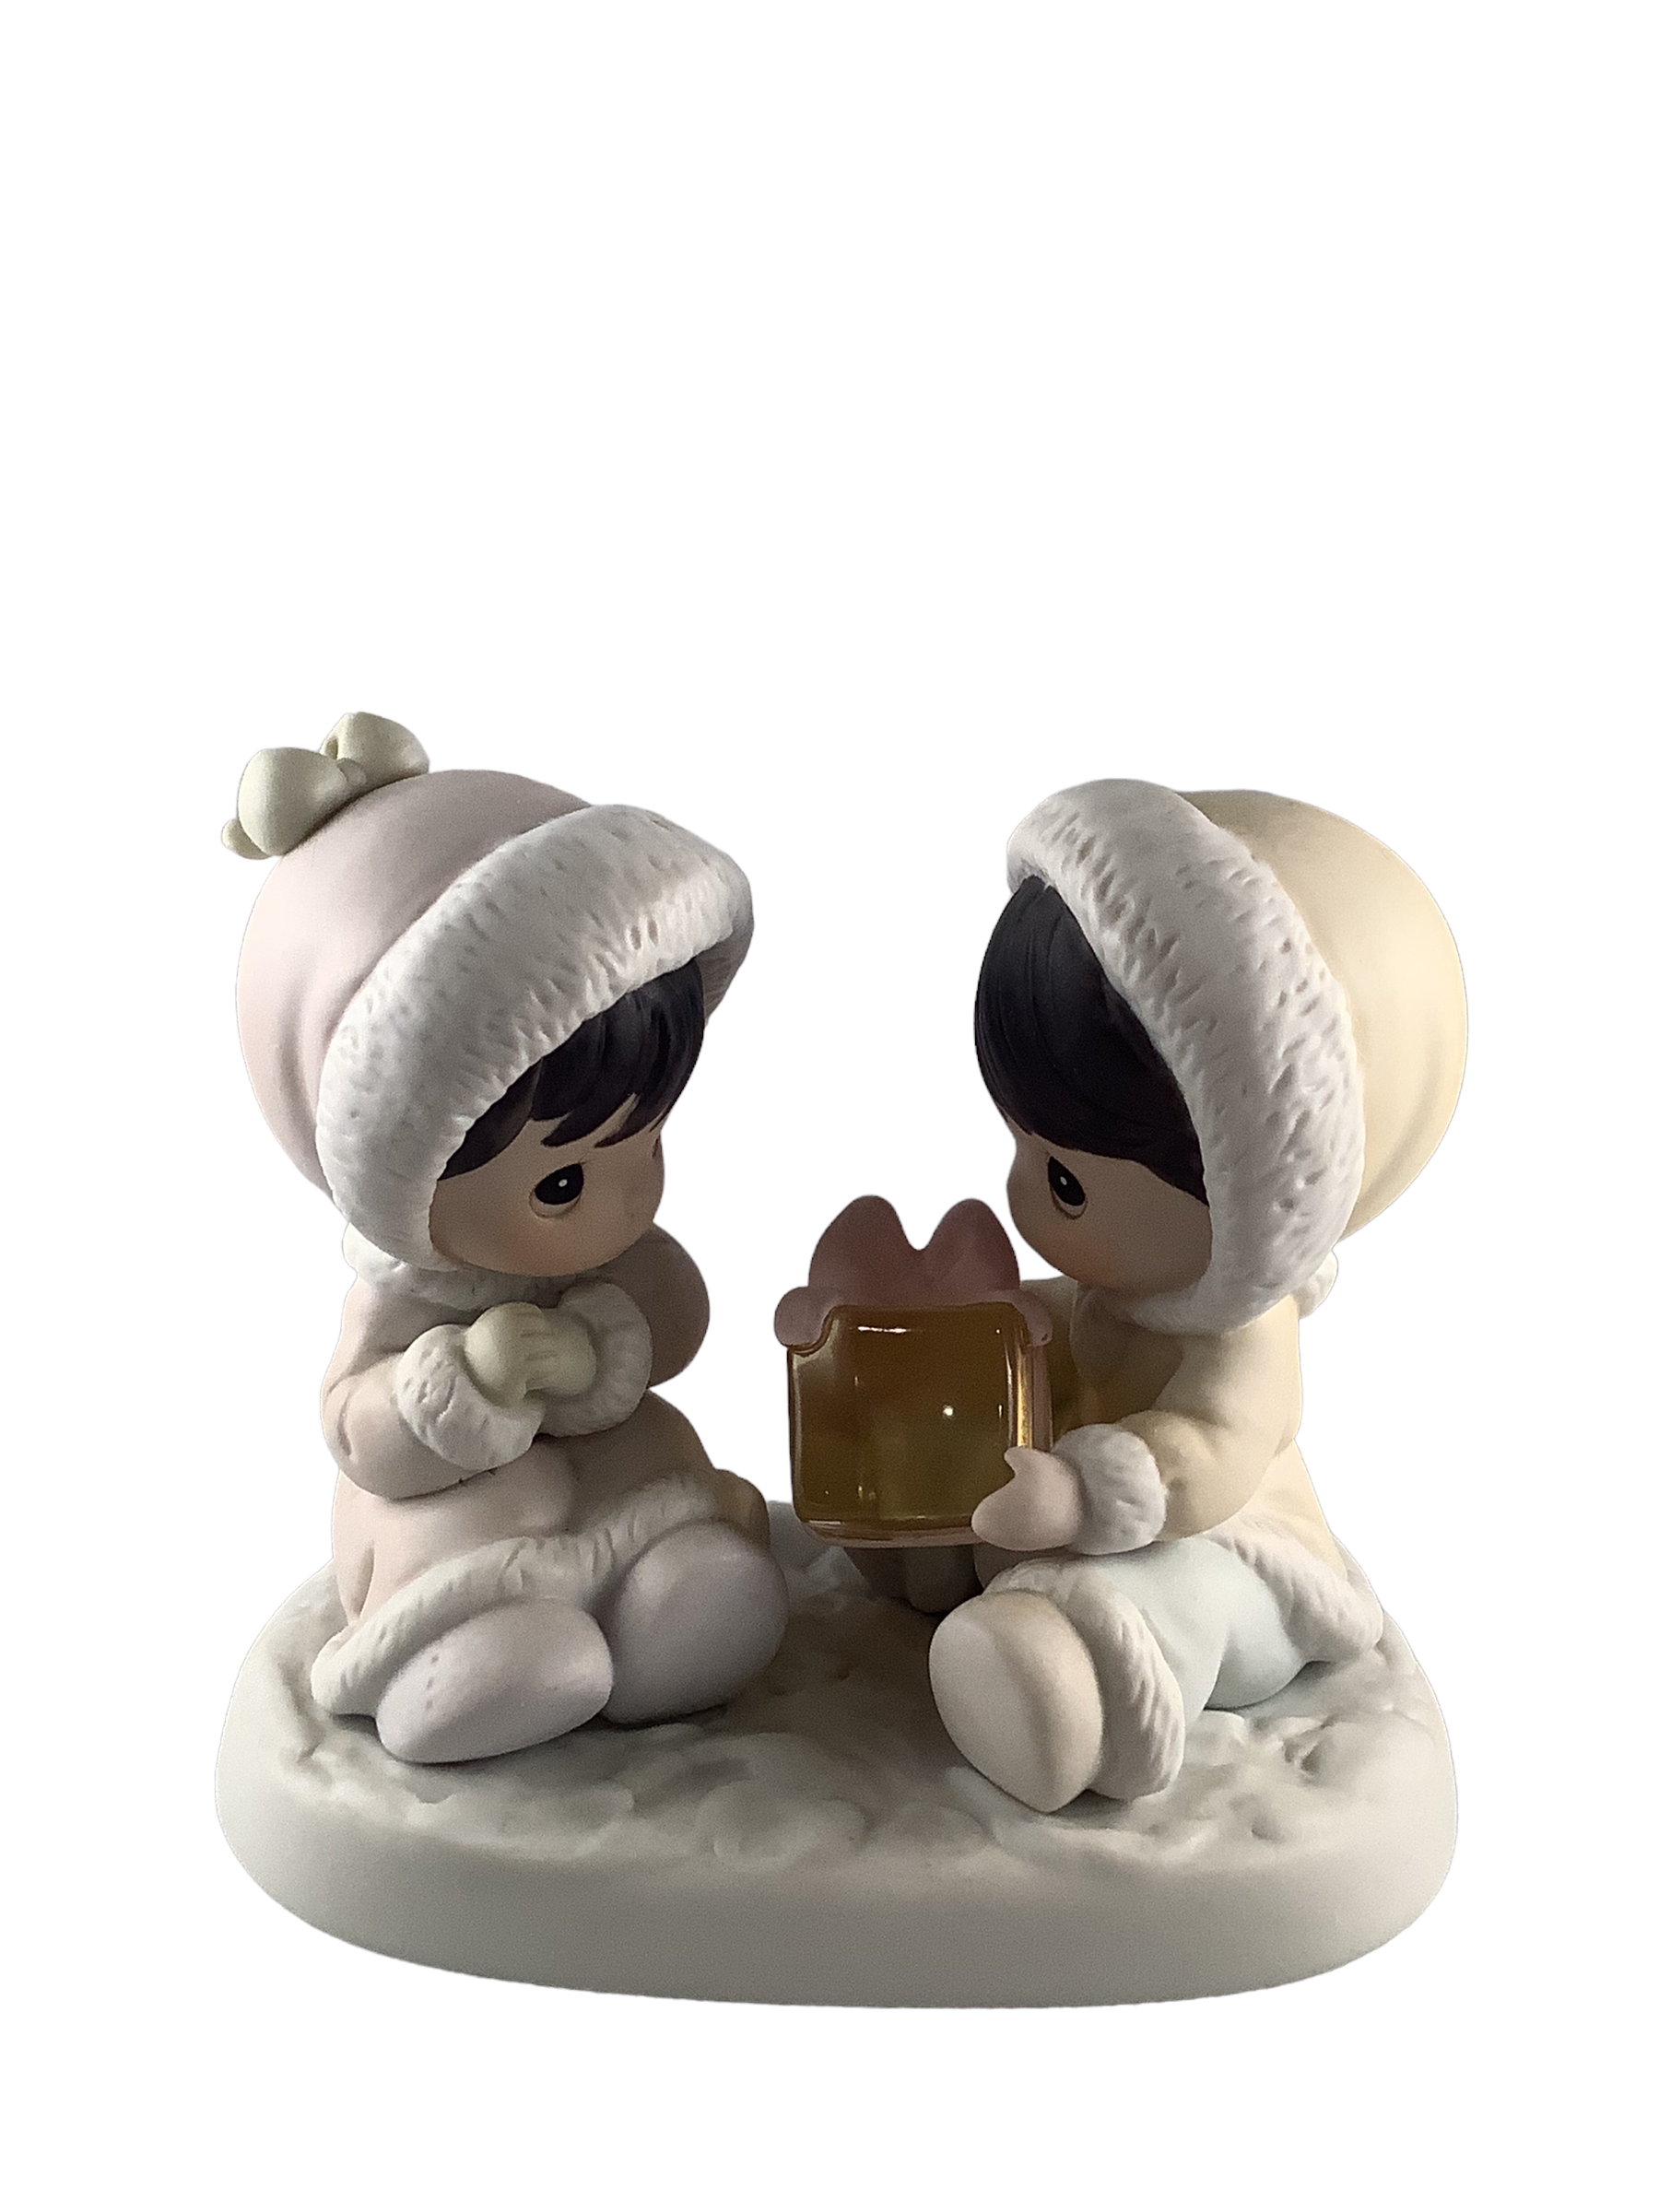 I Only Have Ice For You - Precious Moment Figurine